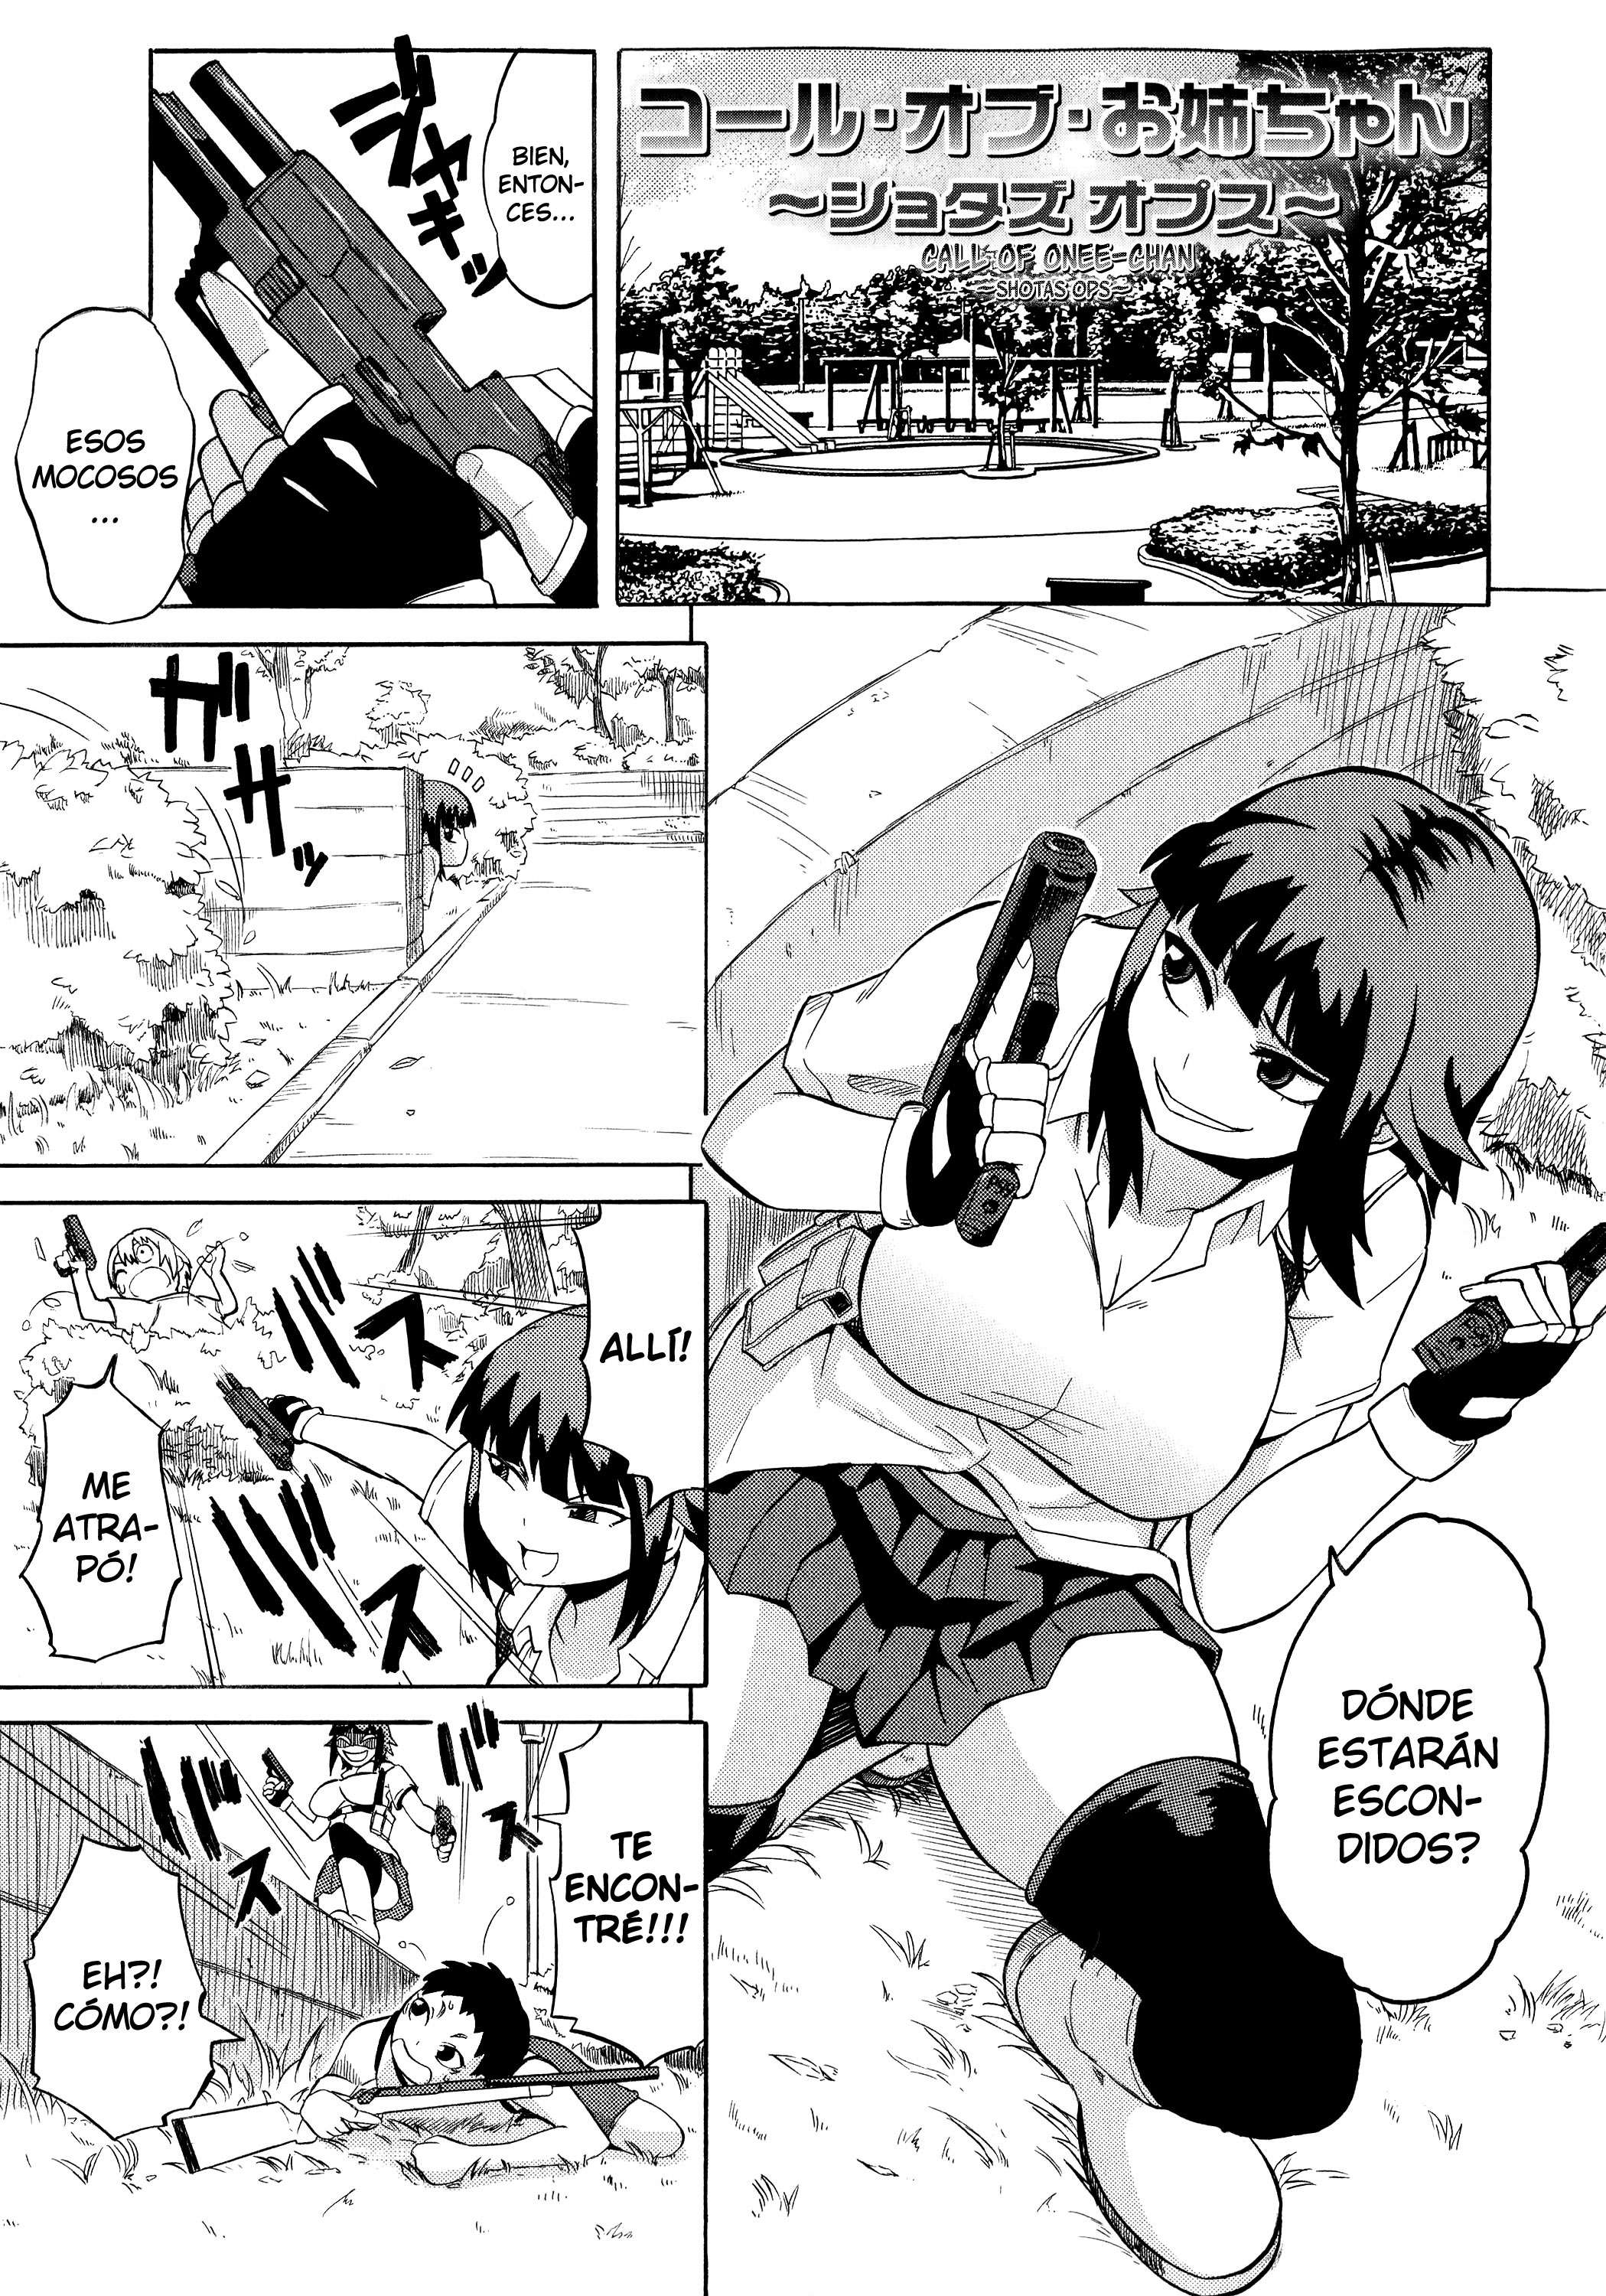 Call of Onee-chan ~Shotas Ops~ Chapter-1 - 0